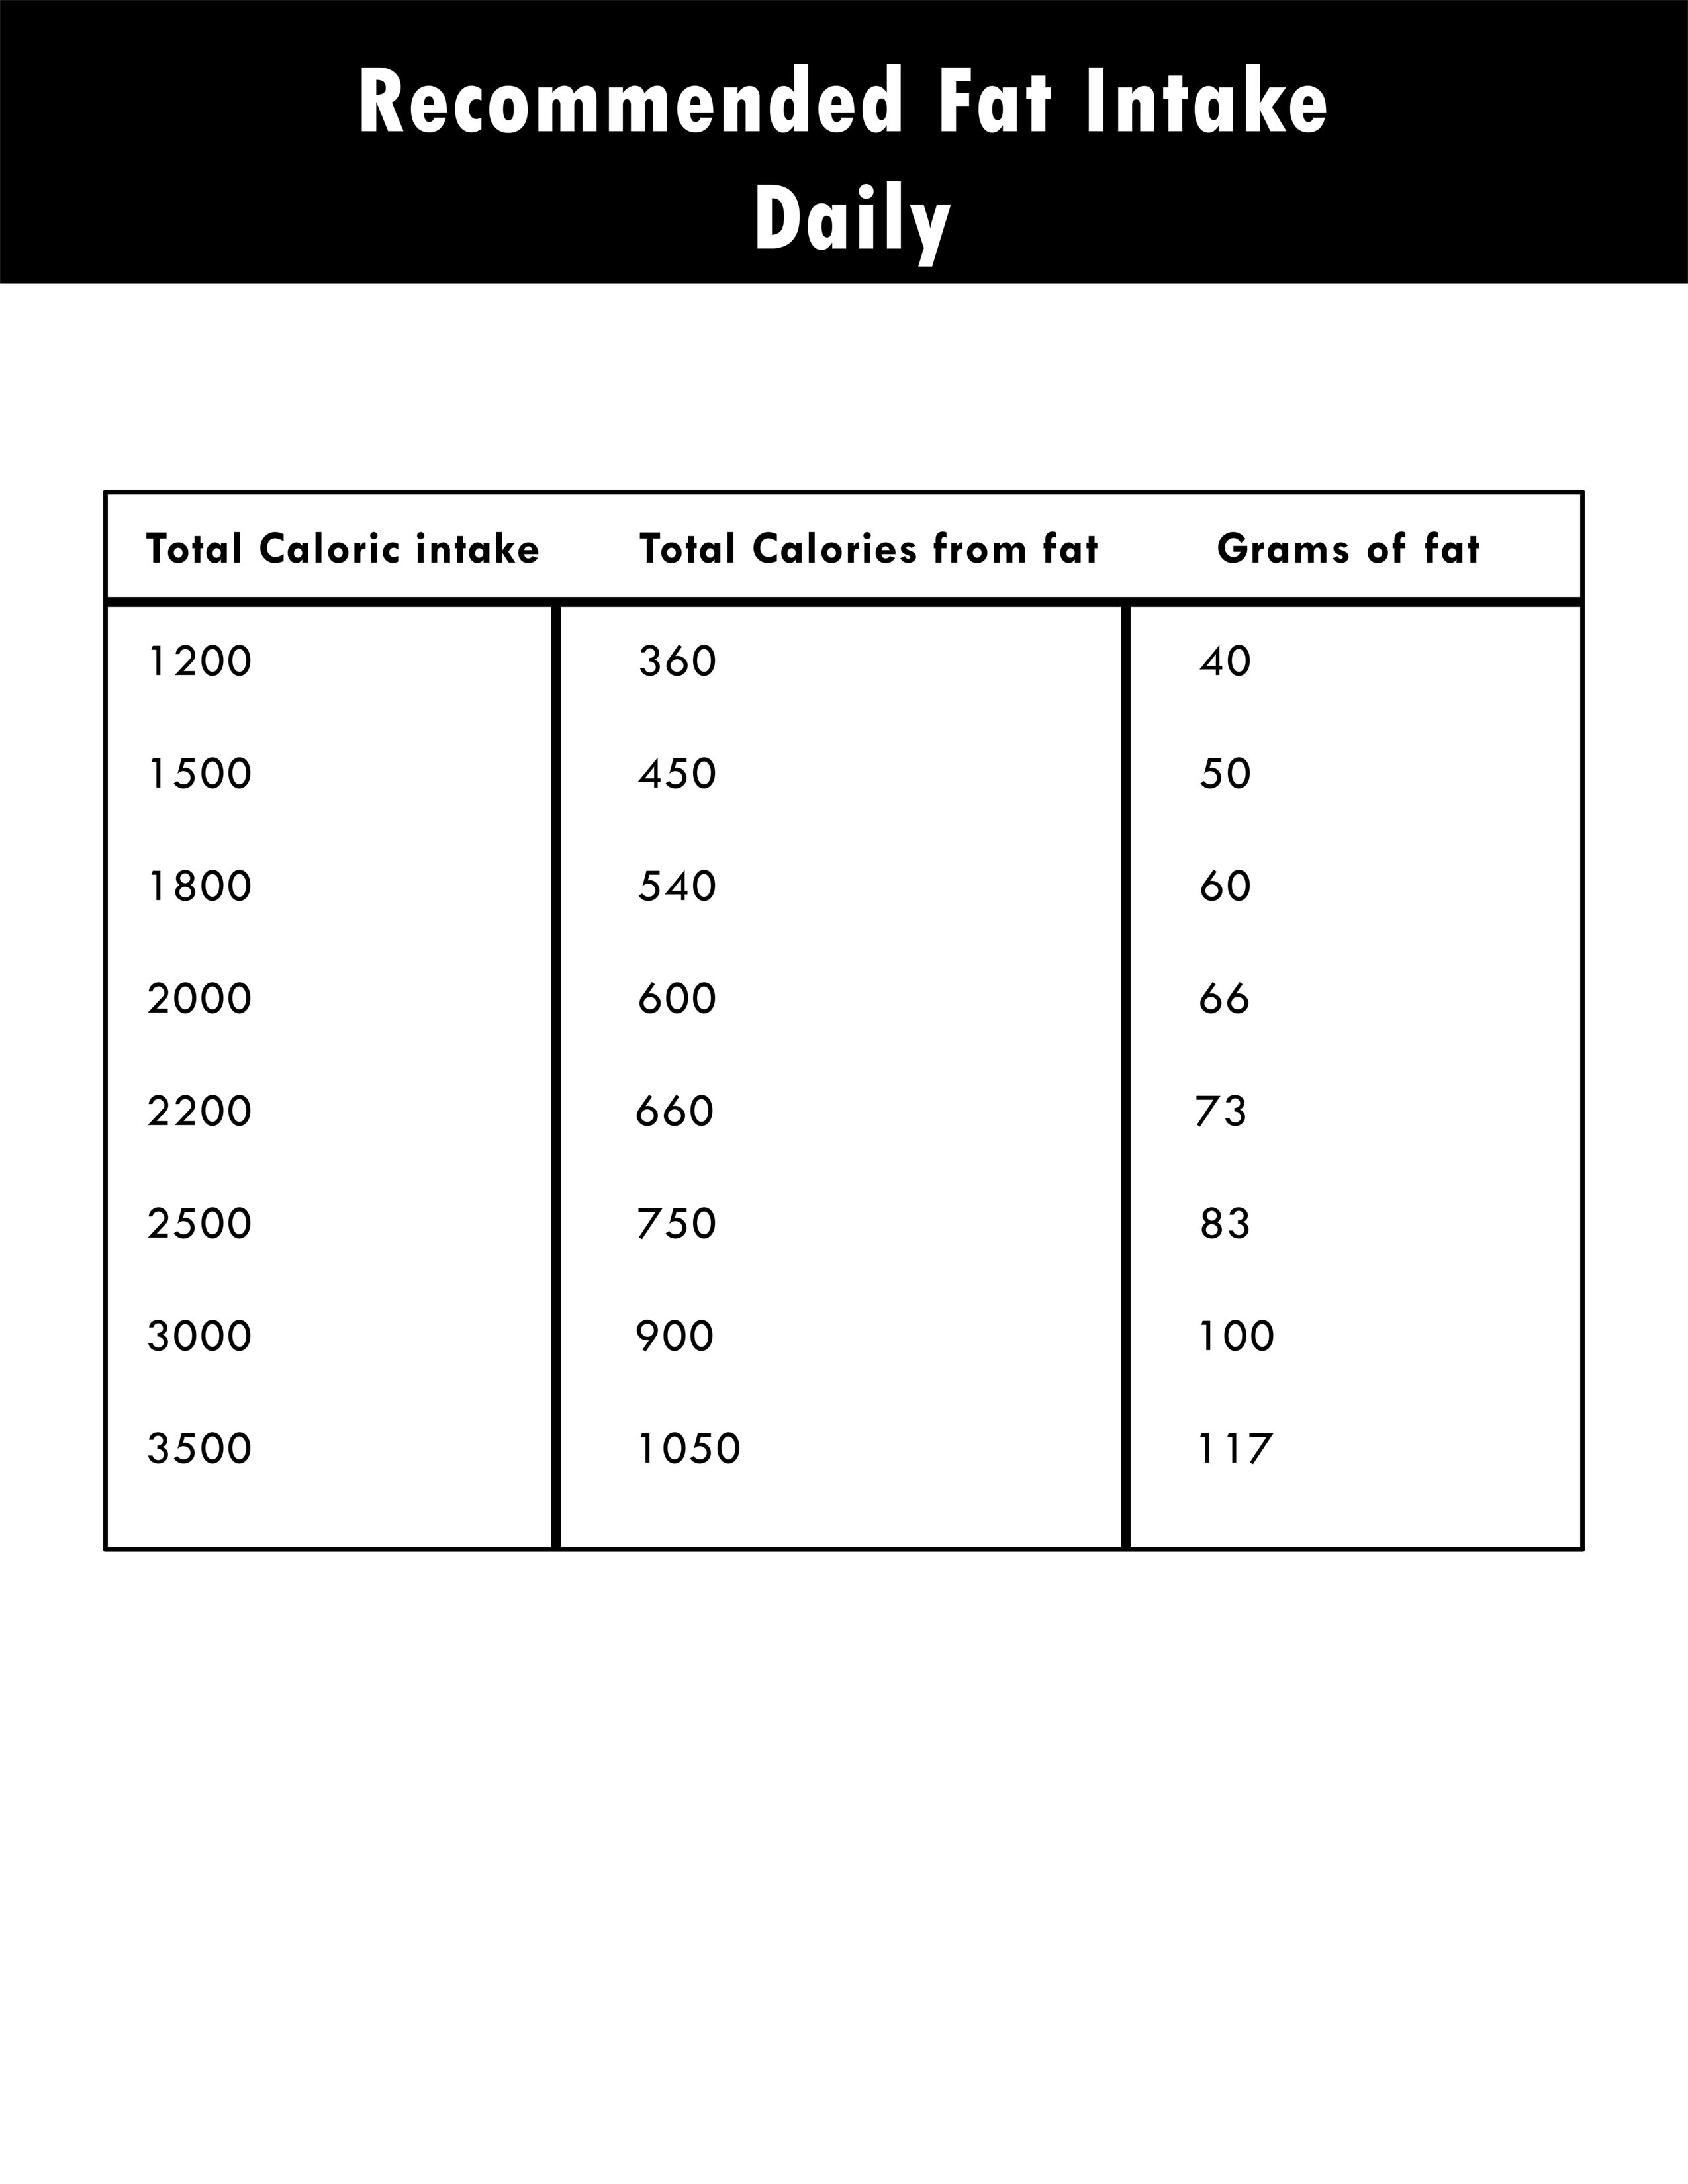 Fat intake recommendations